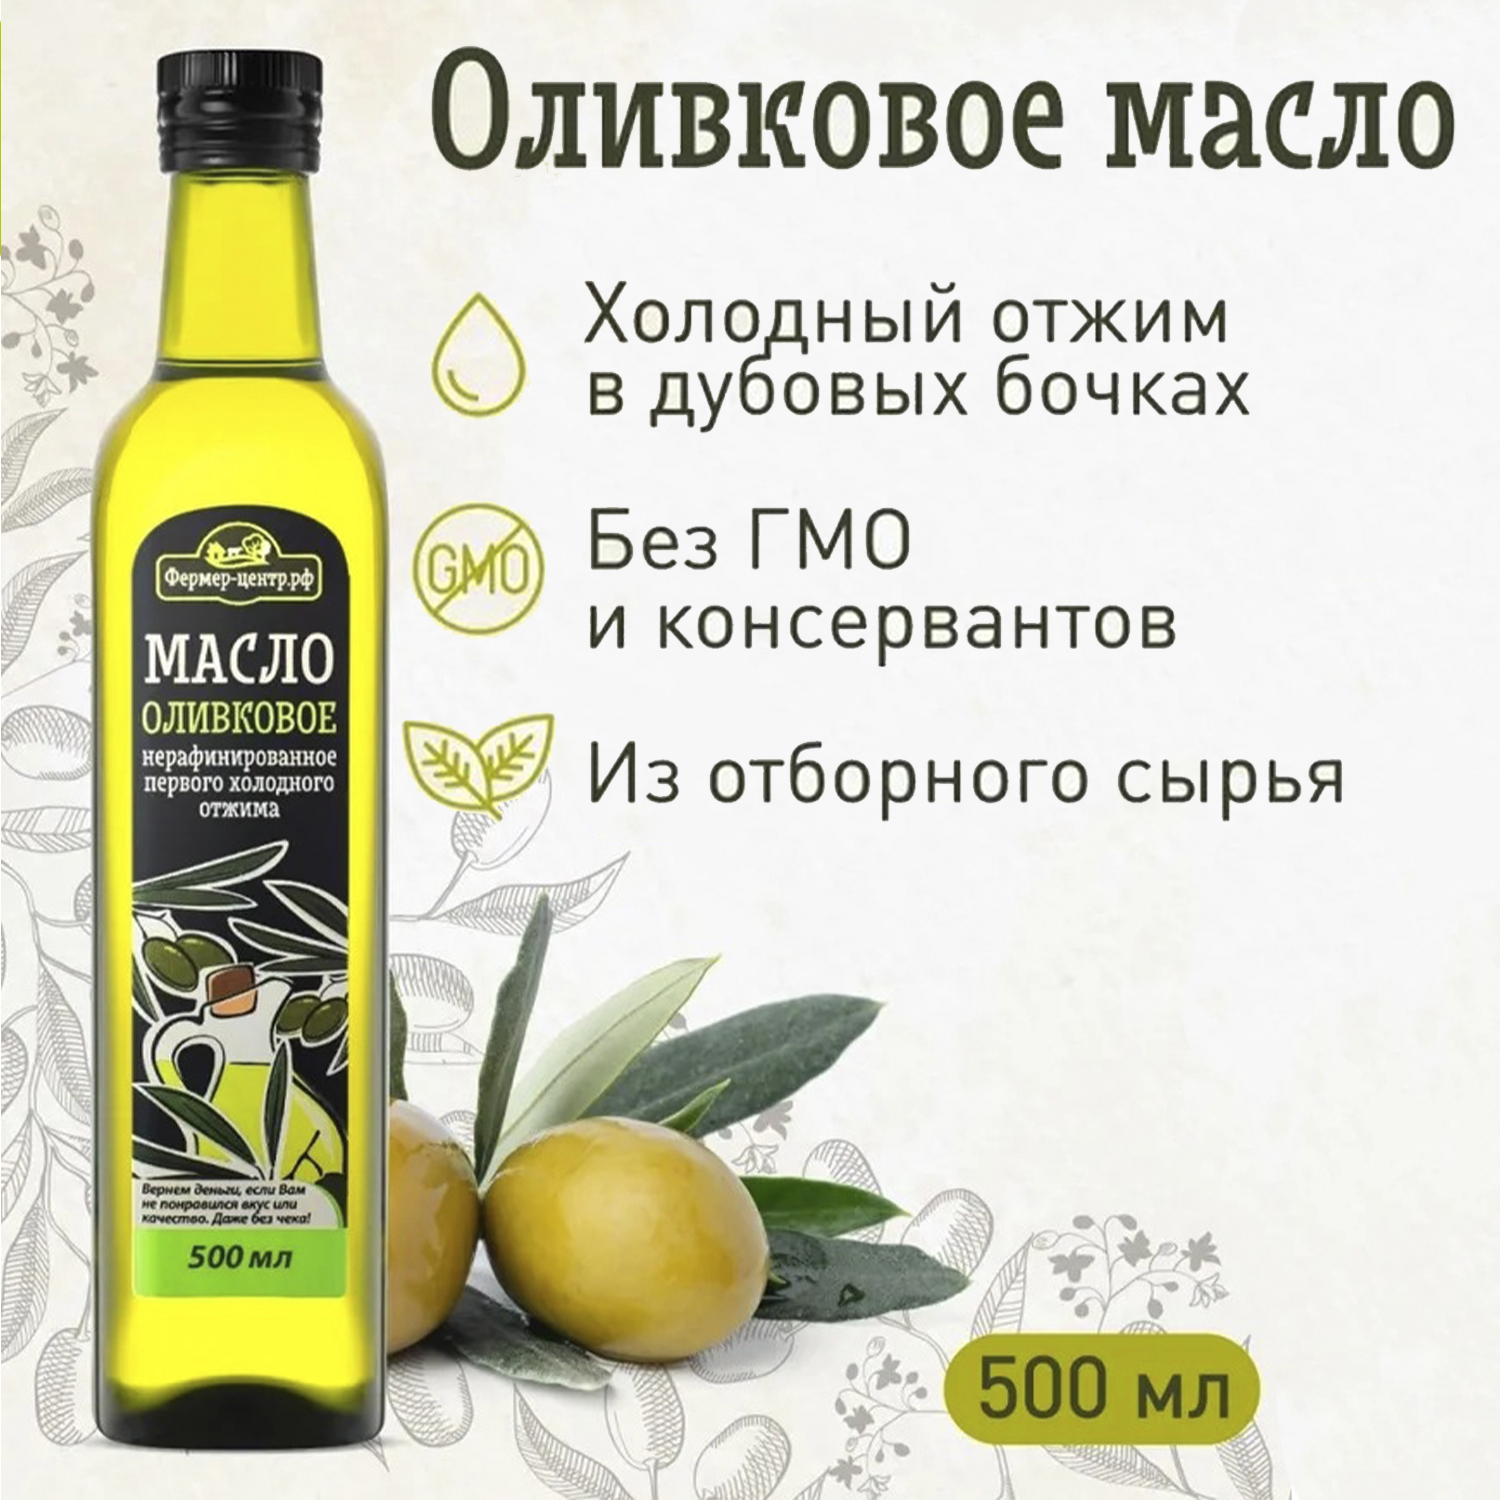 Celebrity in olive oil and threesome